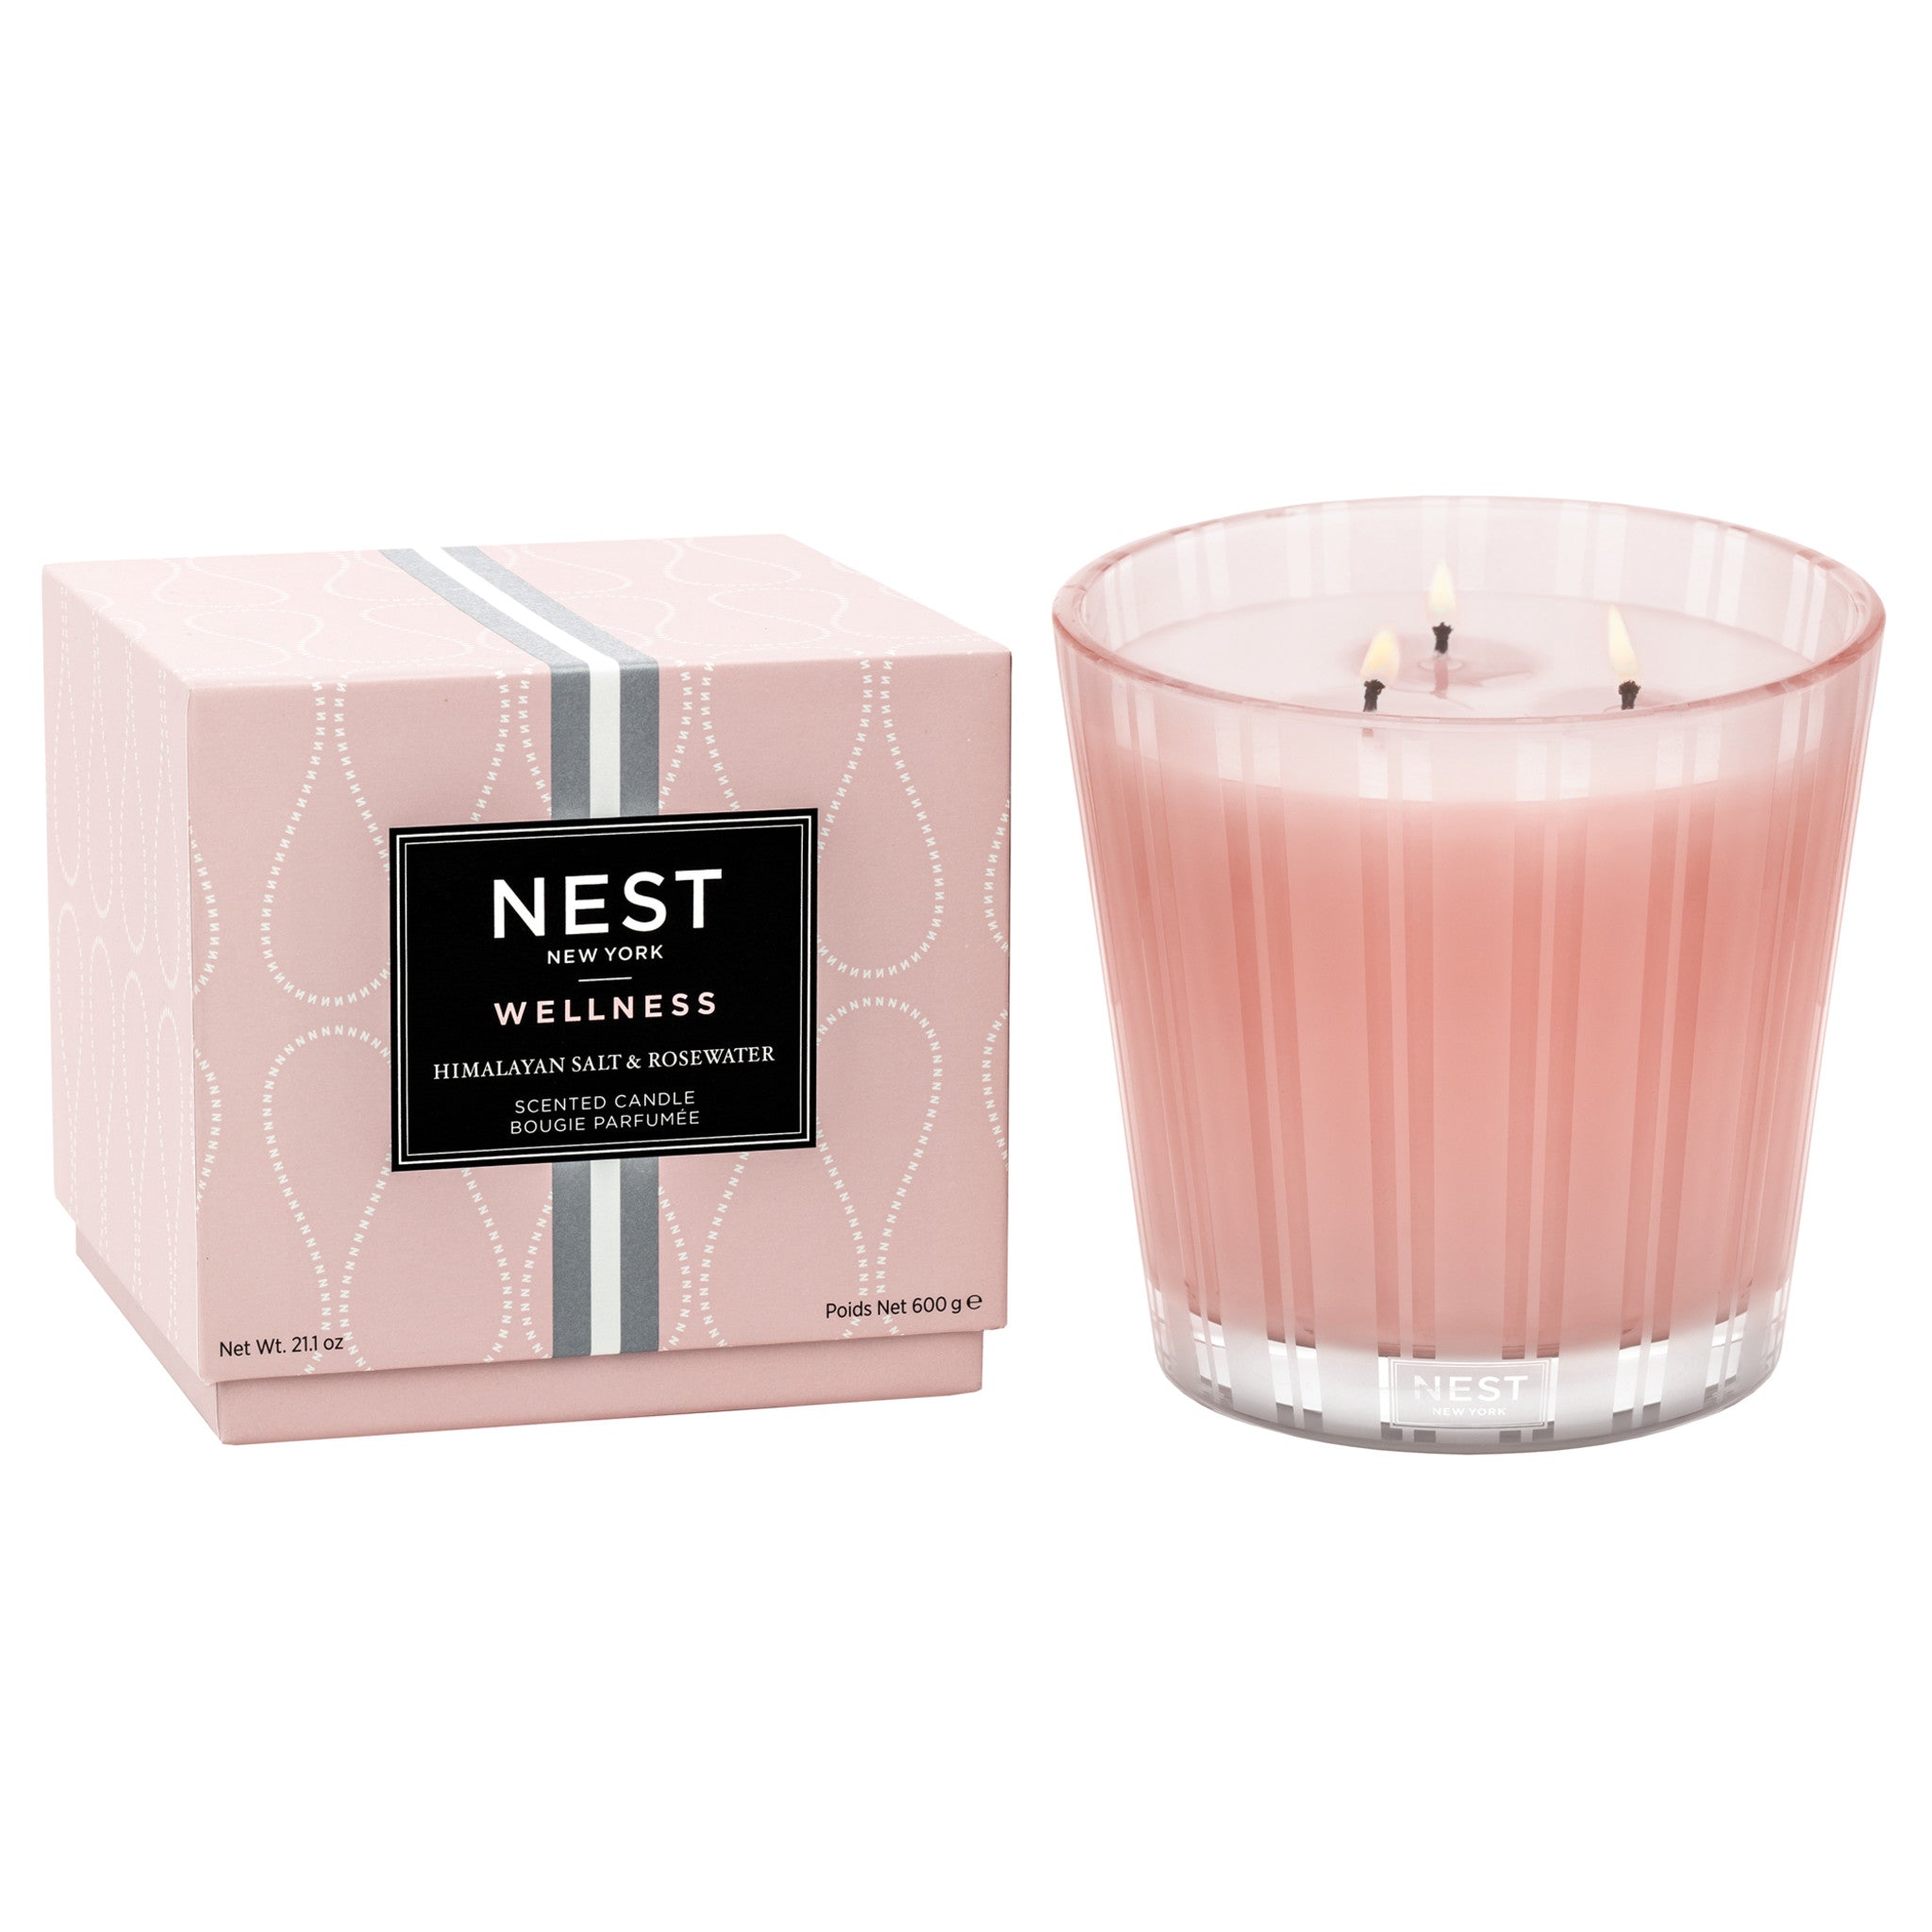 Nest Himalayan Salt and Rosewater Candle Size variant: 21.2 oz (3-Wick) main image.